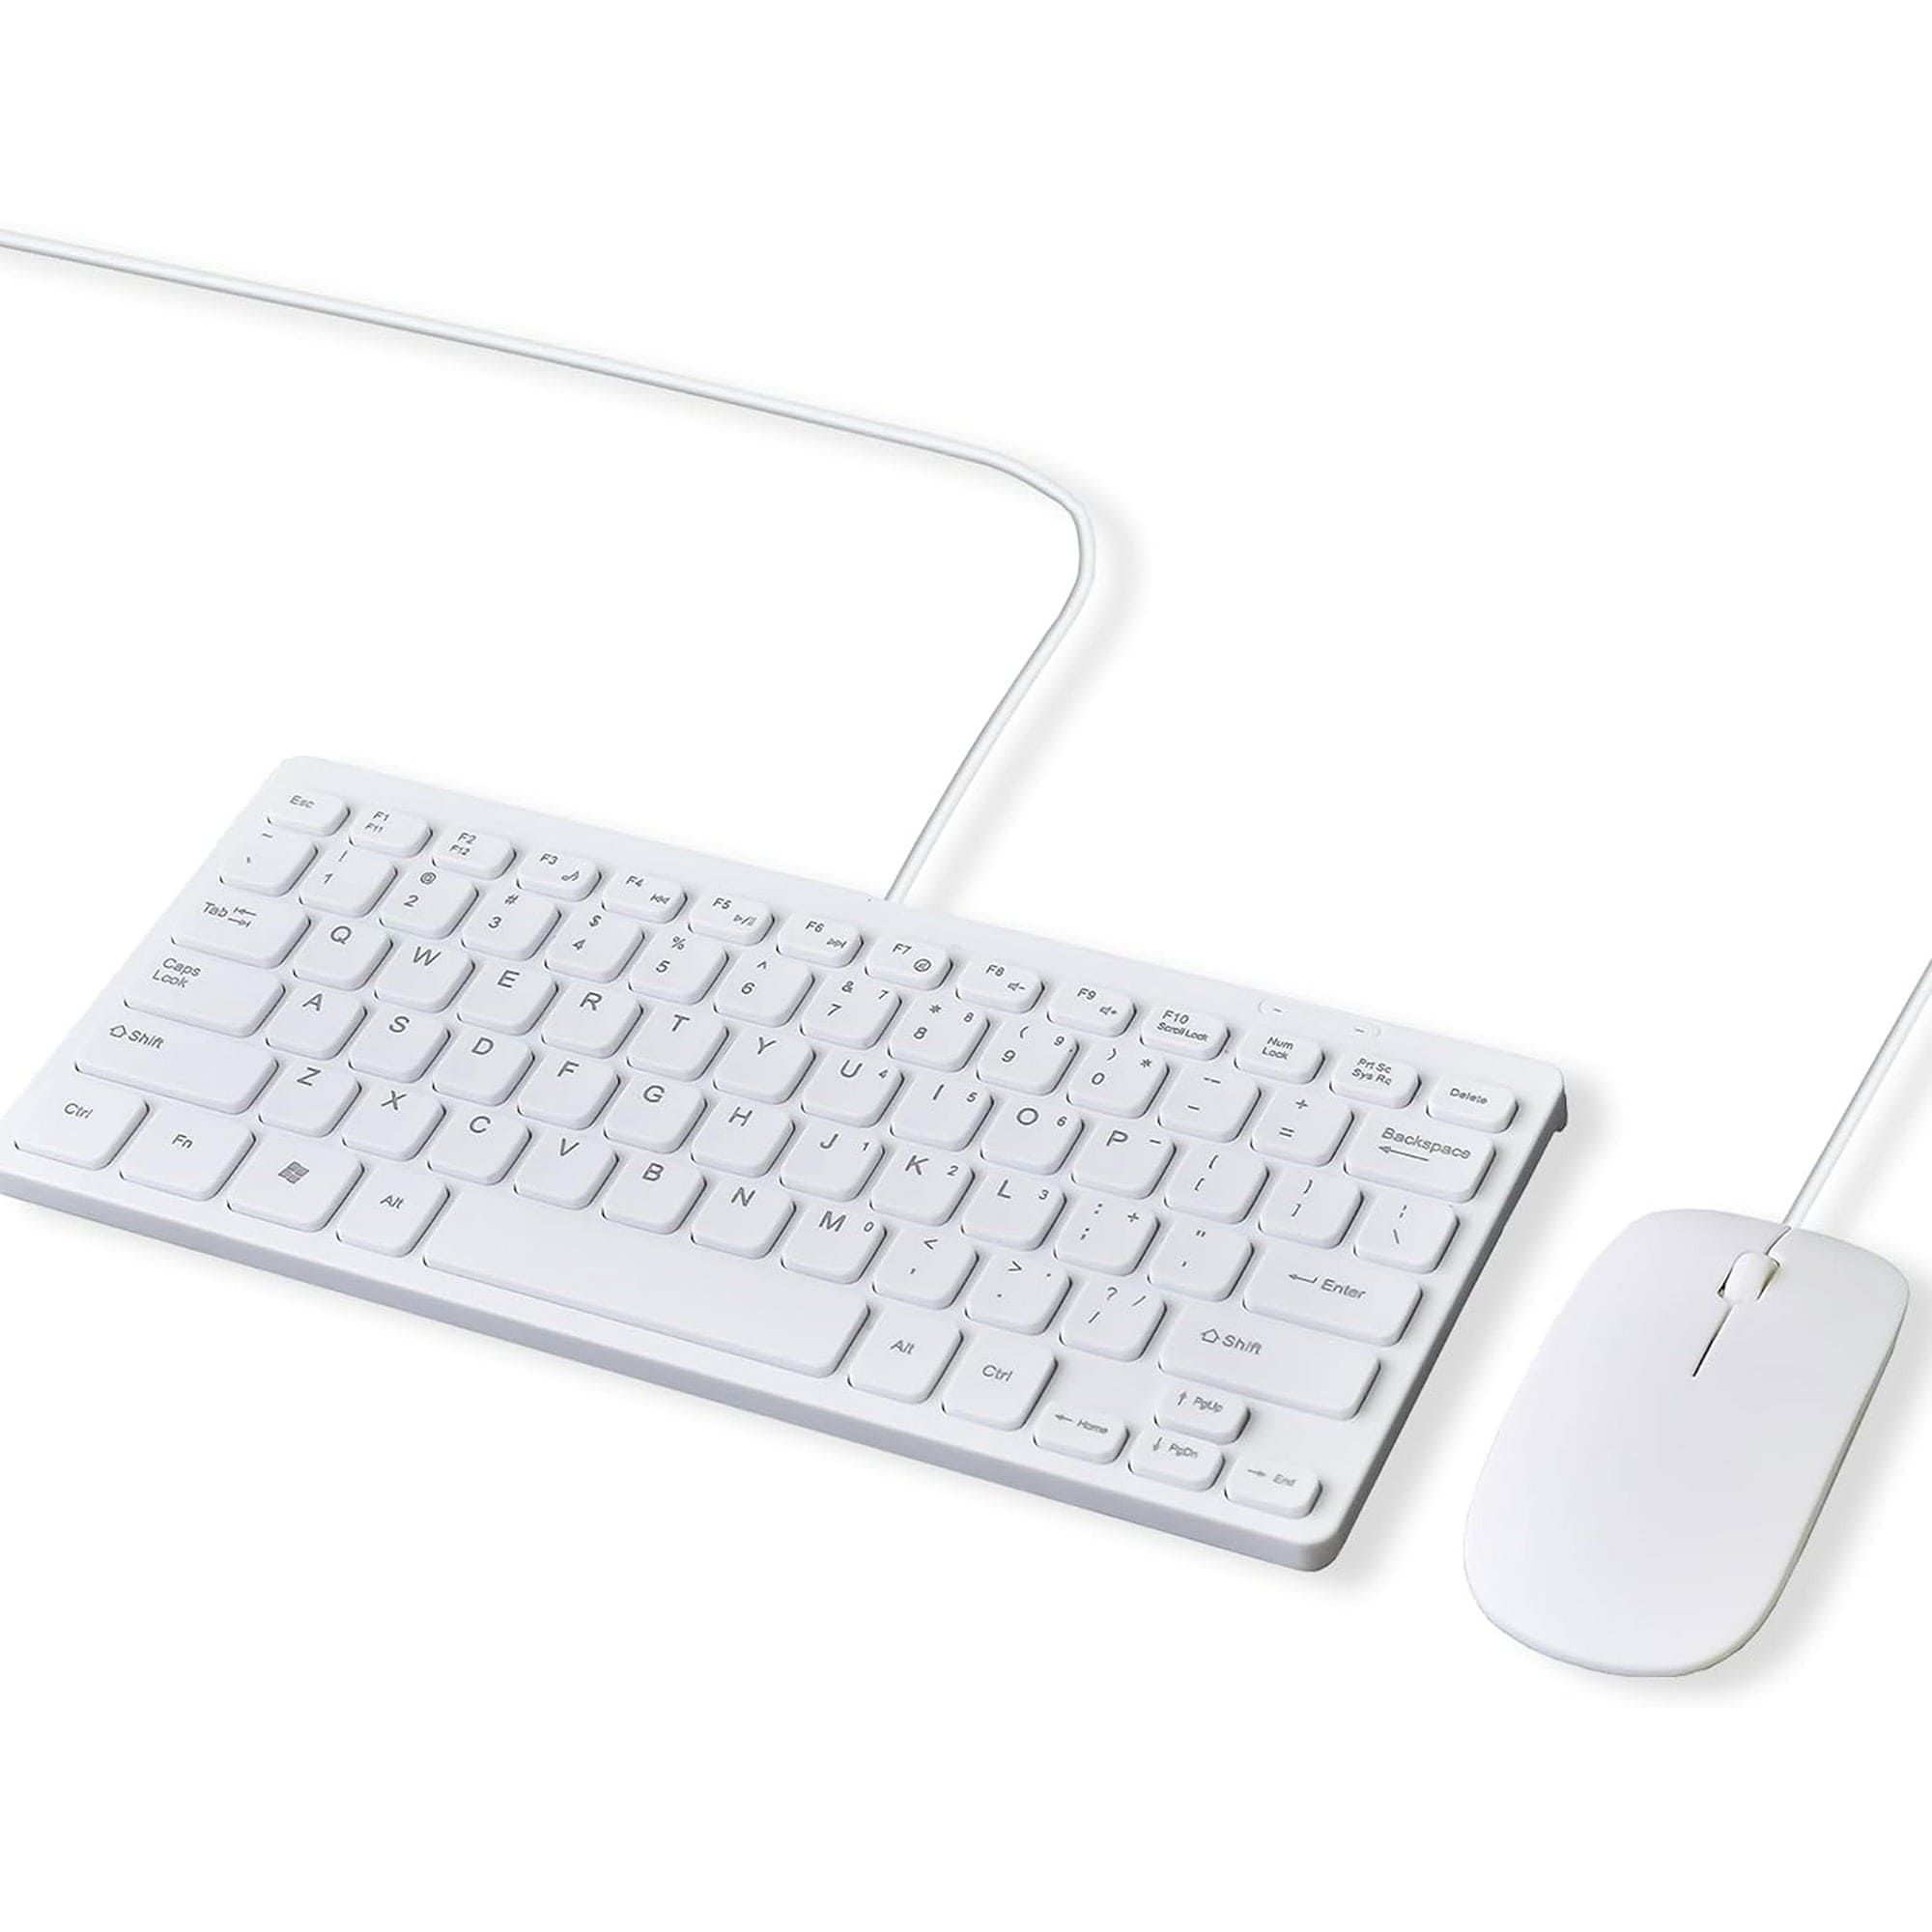 Wired Keyboard and Mouse Combo Slim & Quiet 11.25 inch, USB Connection, Compact Keyboard, US English, White